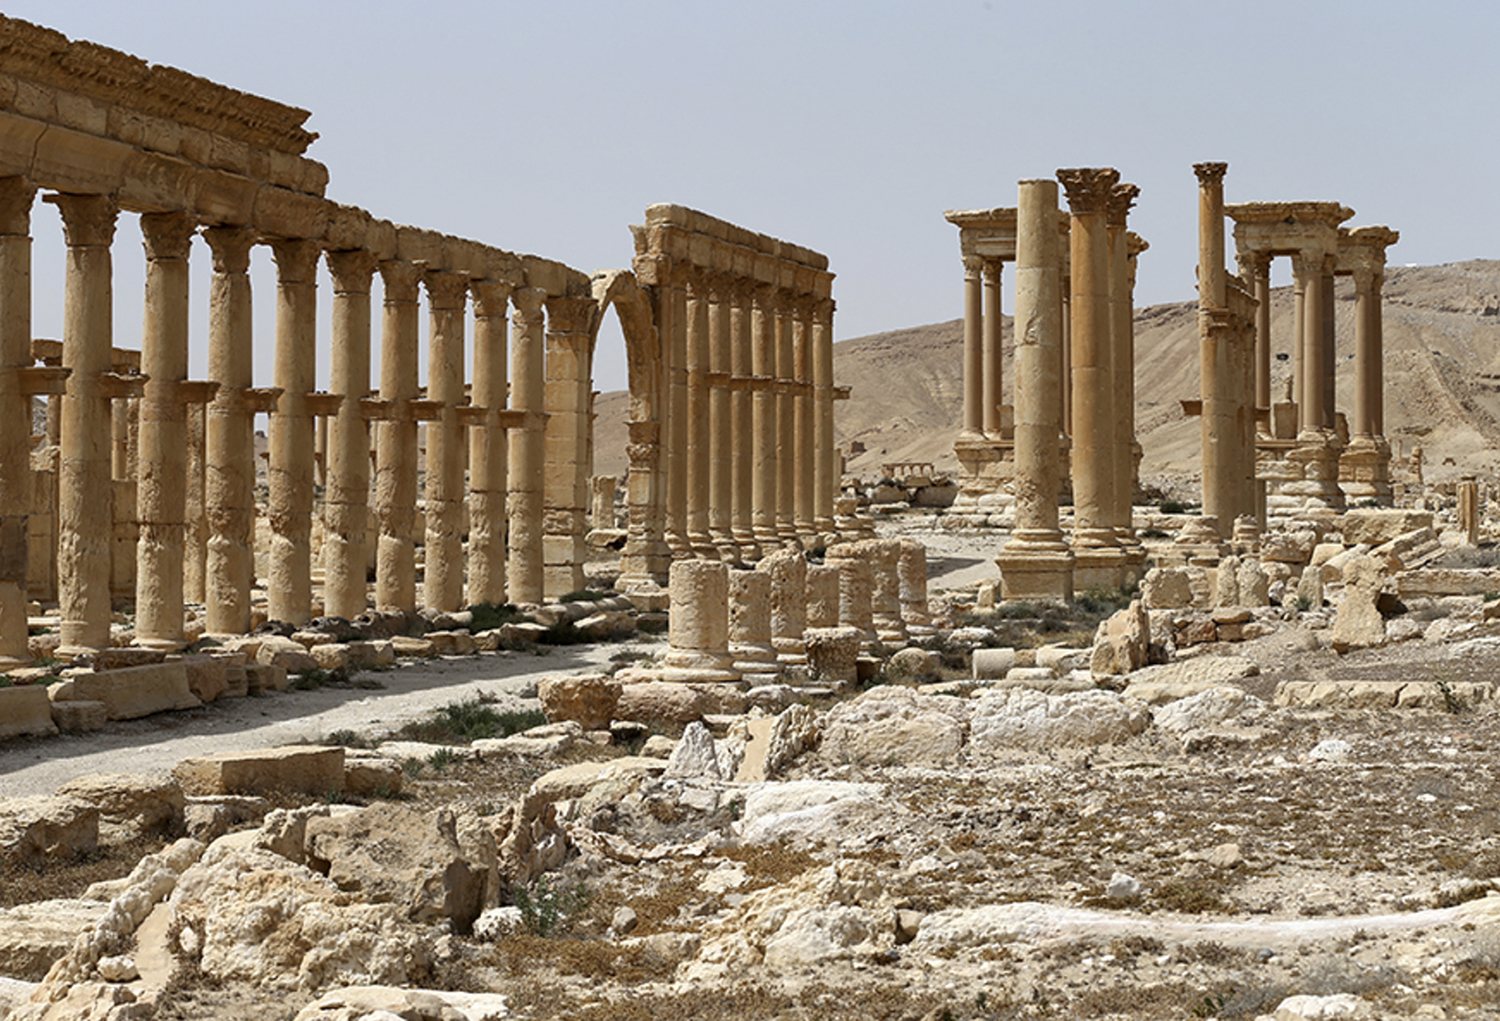 This file photo taken April 8, 2016 and provided by Russian Defense Ministry press service, shows the ancient ruins in Palmyra, Syria. Palmyra, the archaeological gem that Islamic State fighters retook Sunday, Dec. 11, 2016, from Syrian troops is a desert oasis surrounded by palm trees, and a UNESCO world heritage site, that boasts 2,000-year-old towering Roman-era colonnades and priceless artifacts. It is also a strategic crossroads linking the Syrian capital, Damascus, with the country's east and neighboring Iraq. (Russian Defense Ministry Press Service Photo via AP, File)